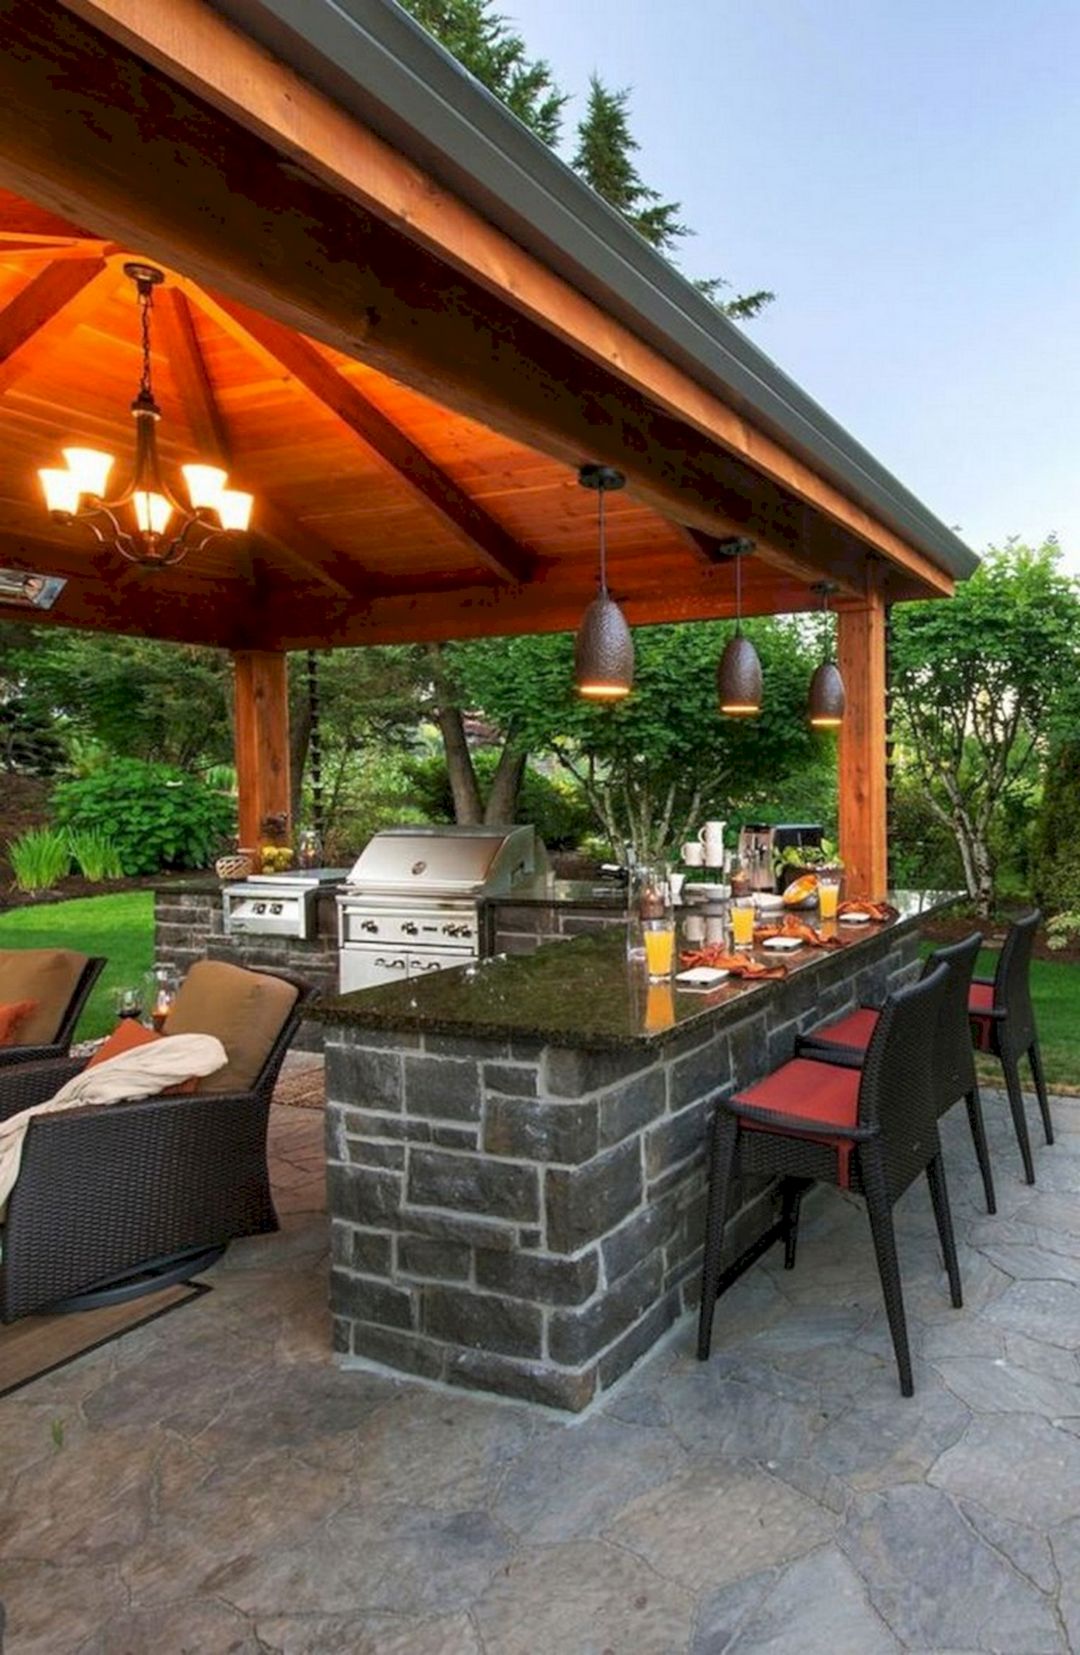 Amazing Outdoor Kitchen Ideas on A Budget